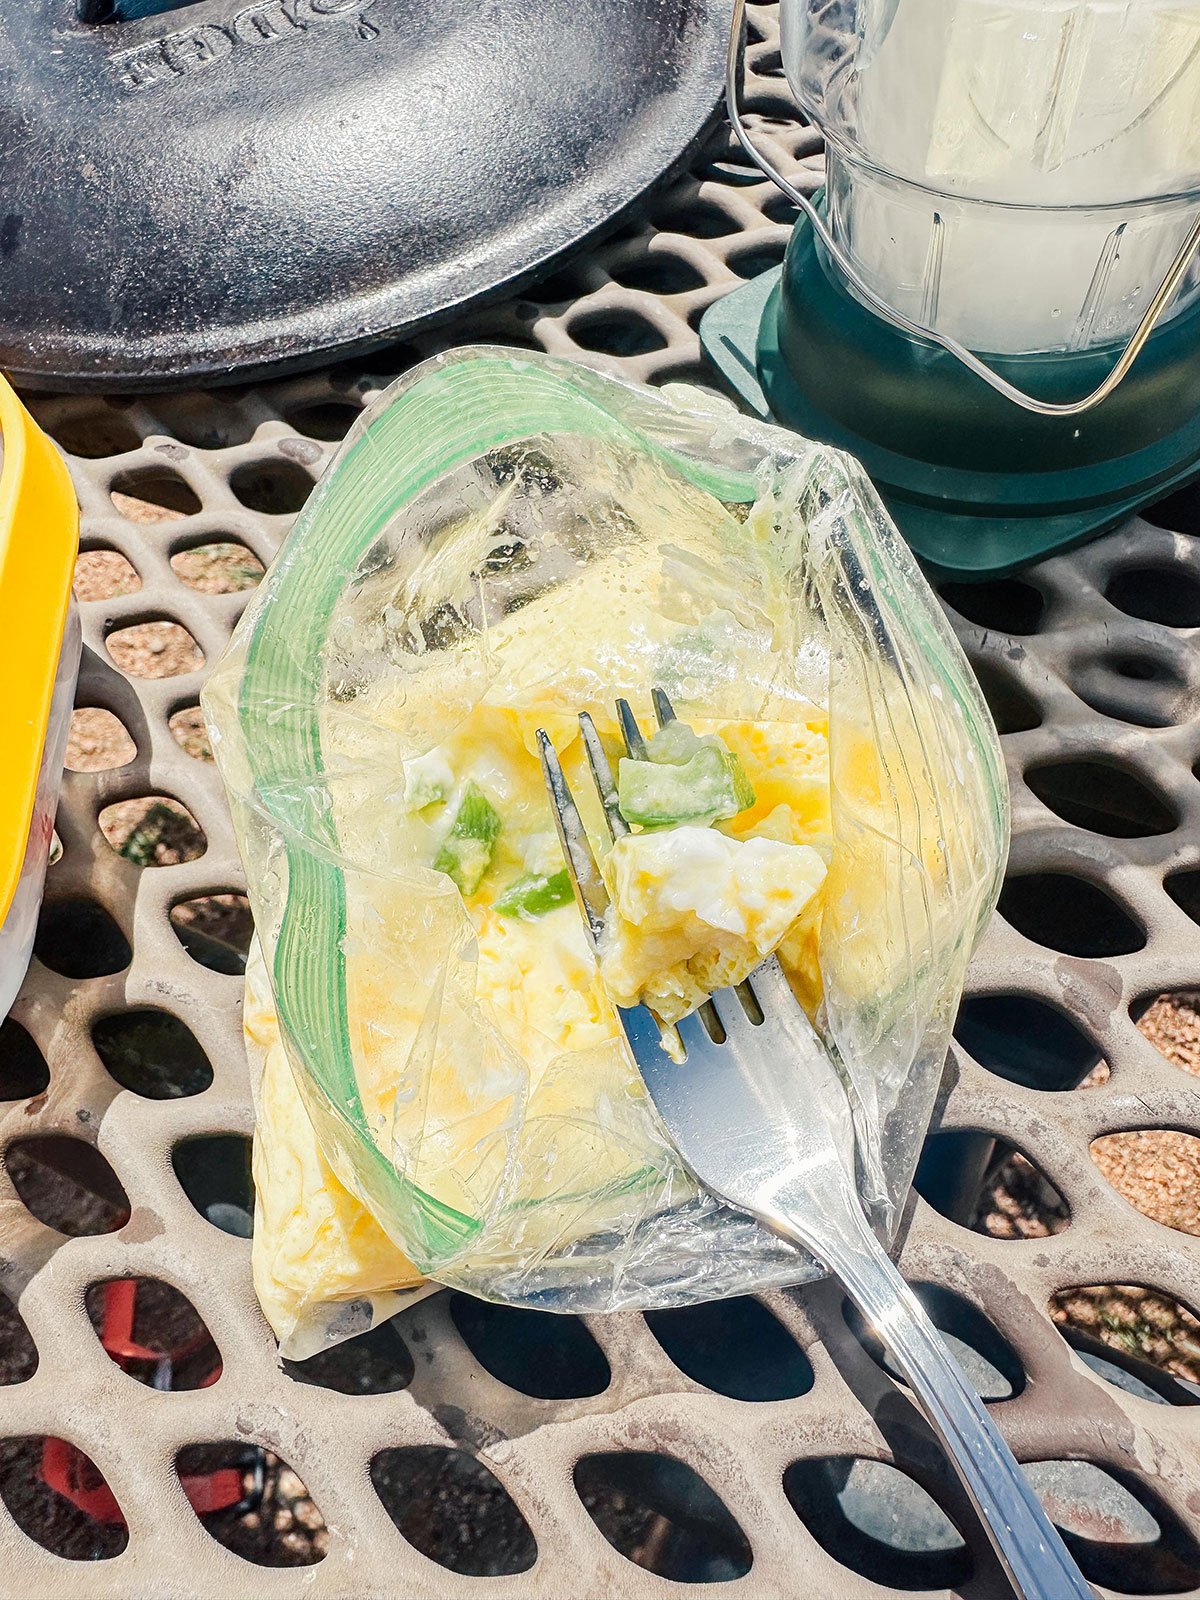 Scrambled eggs on a fork by a picnic table.